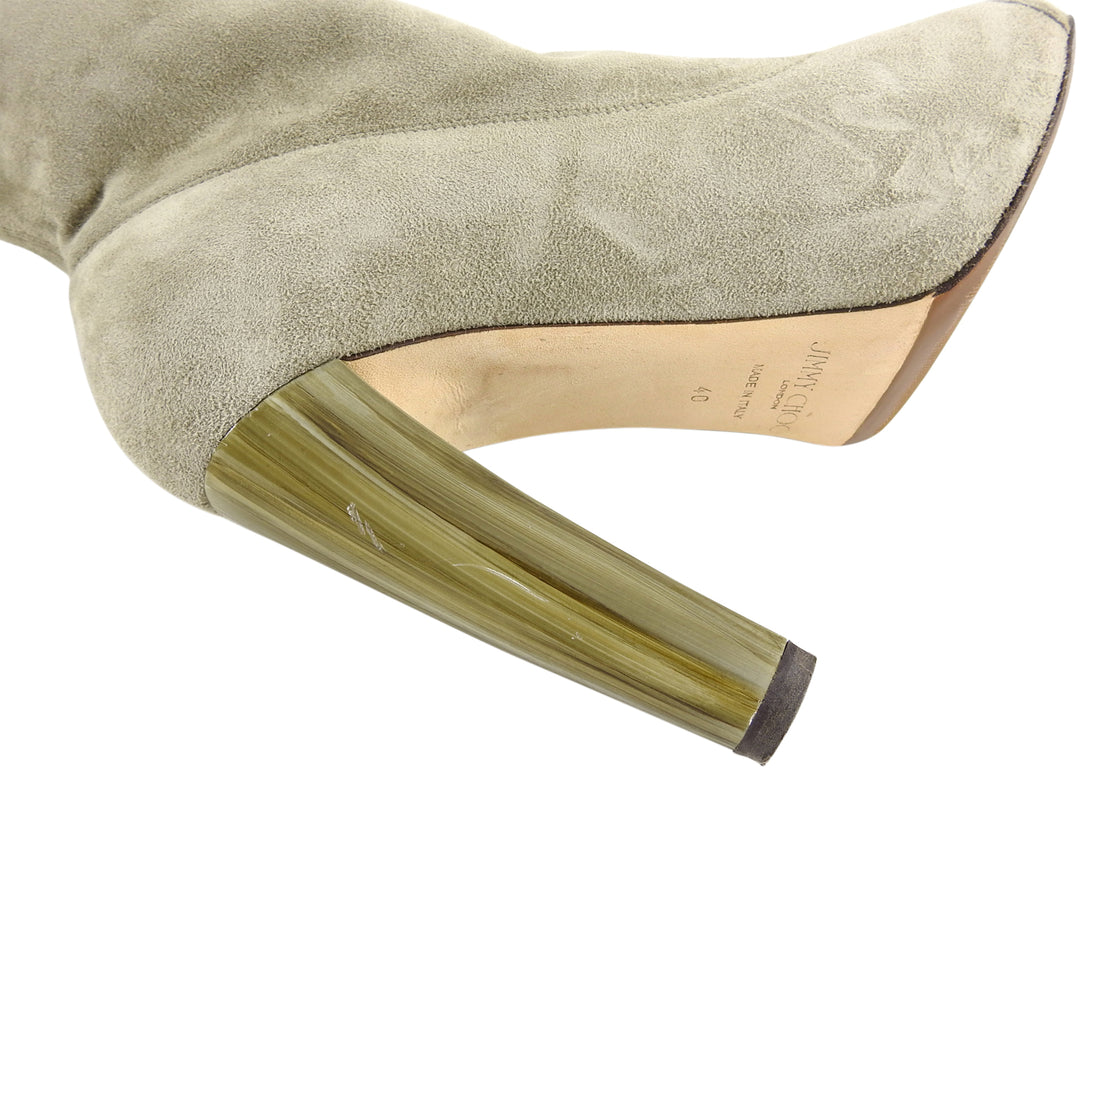 Jimmy Choo Open Toe Maja Suede Ankle Boots with Marbled Heels - 40